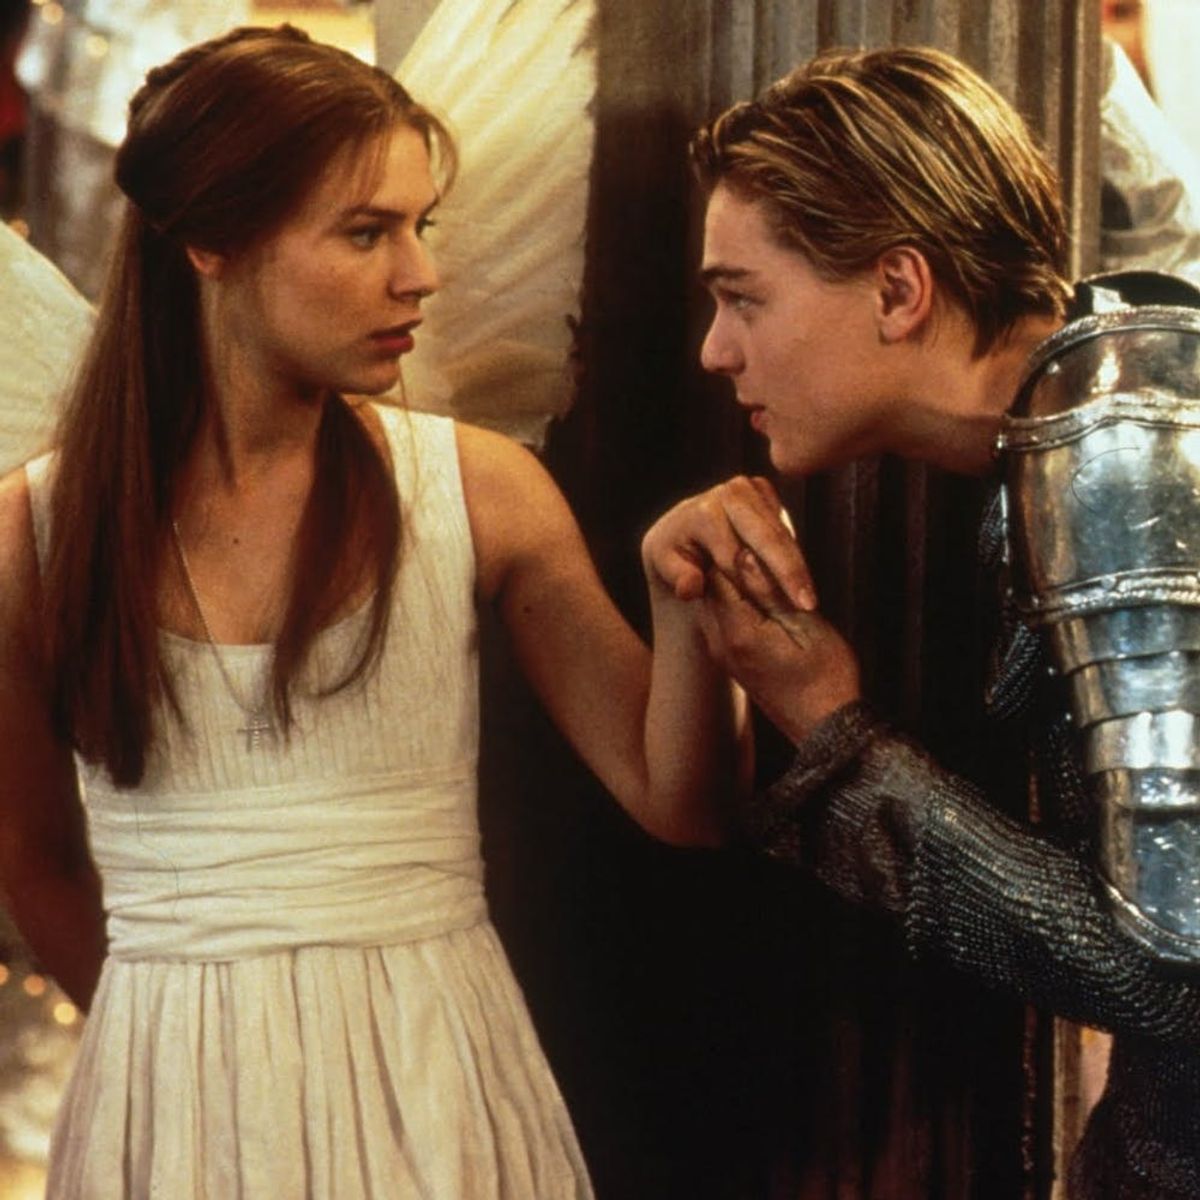 IRL Romeo & Juliet Babies Were Born in the Same Hospital at the Same Time